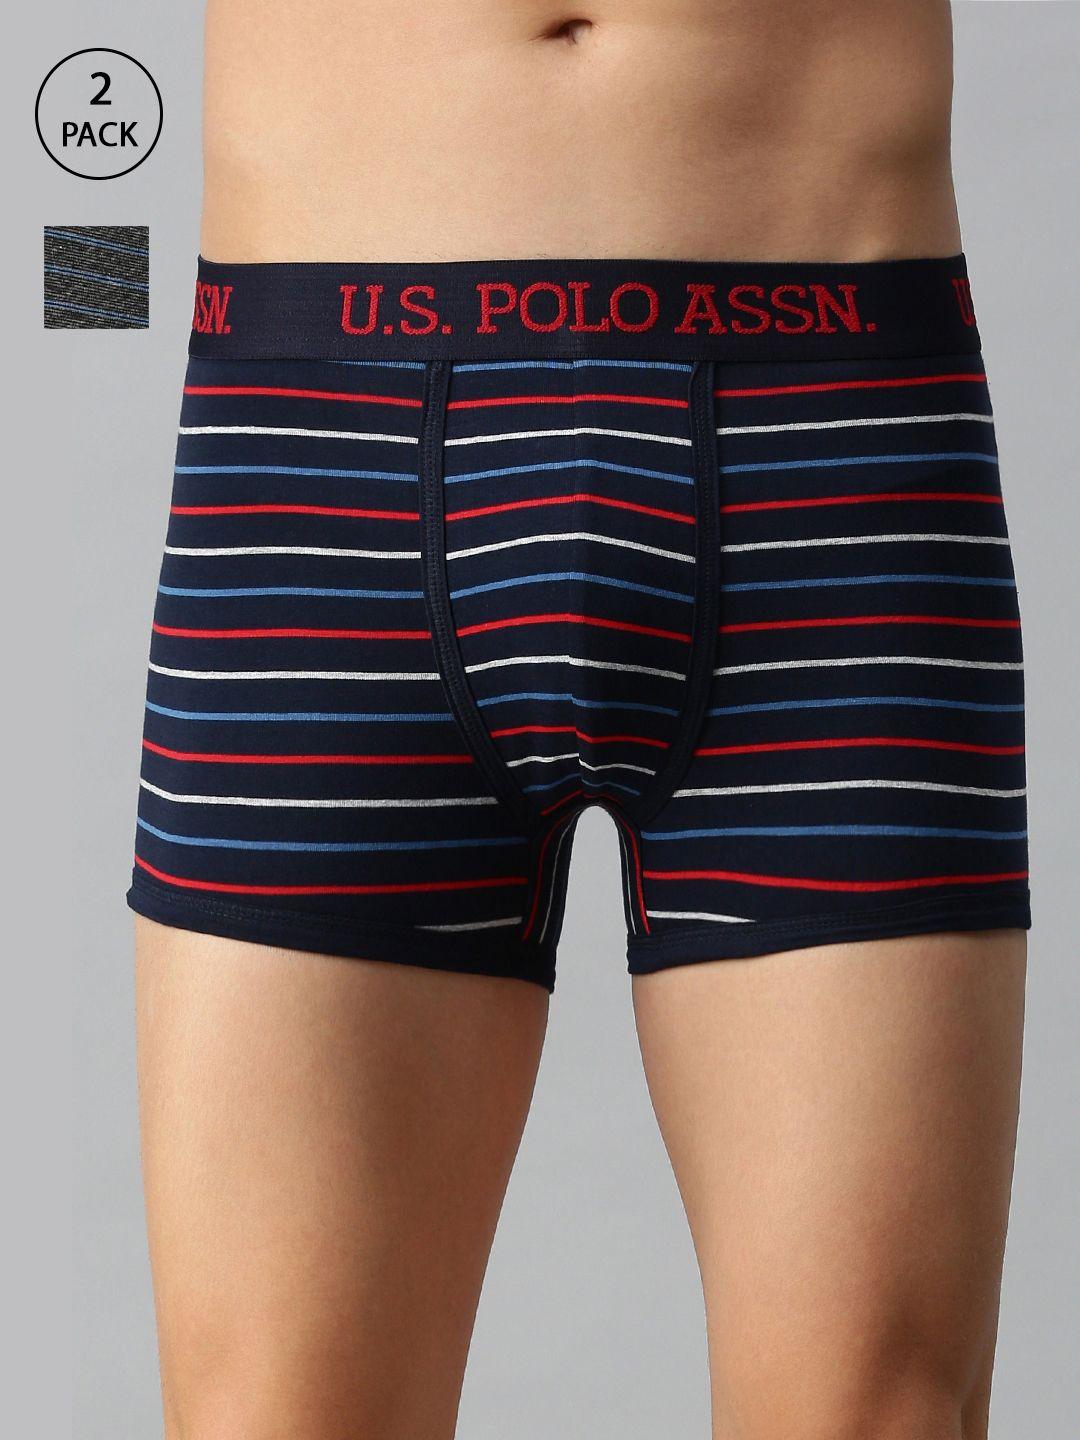 u.s.-polo-assn.-men-pack-of-2-assorted-striped-trunks-i004-br0-p2